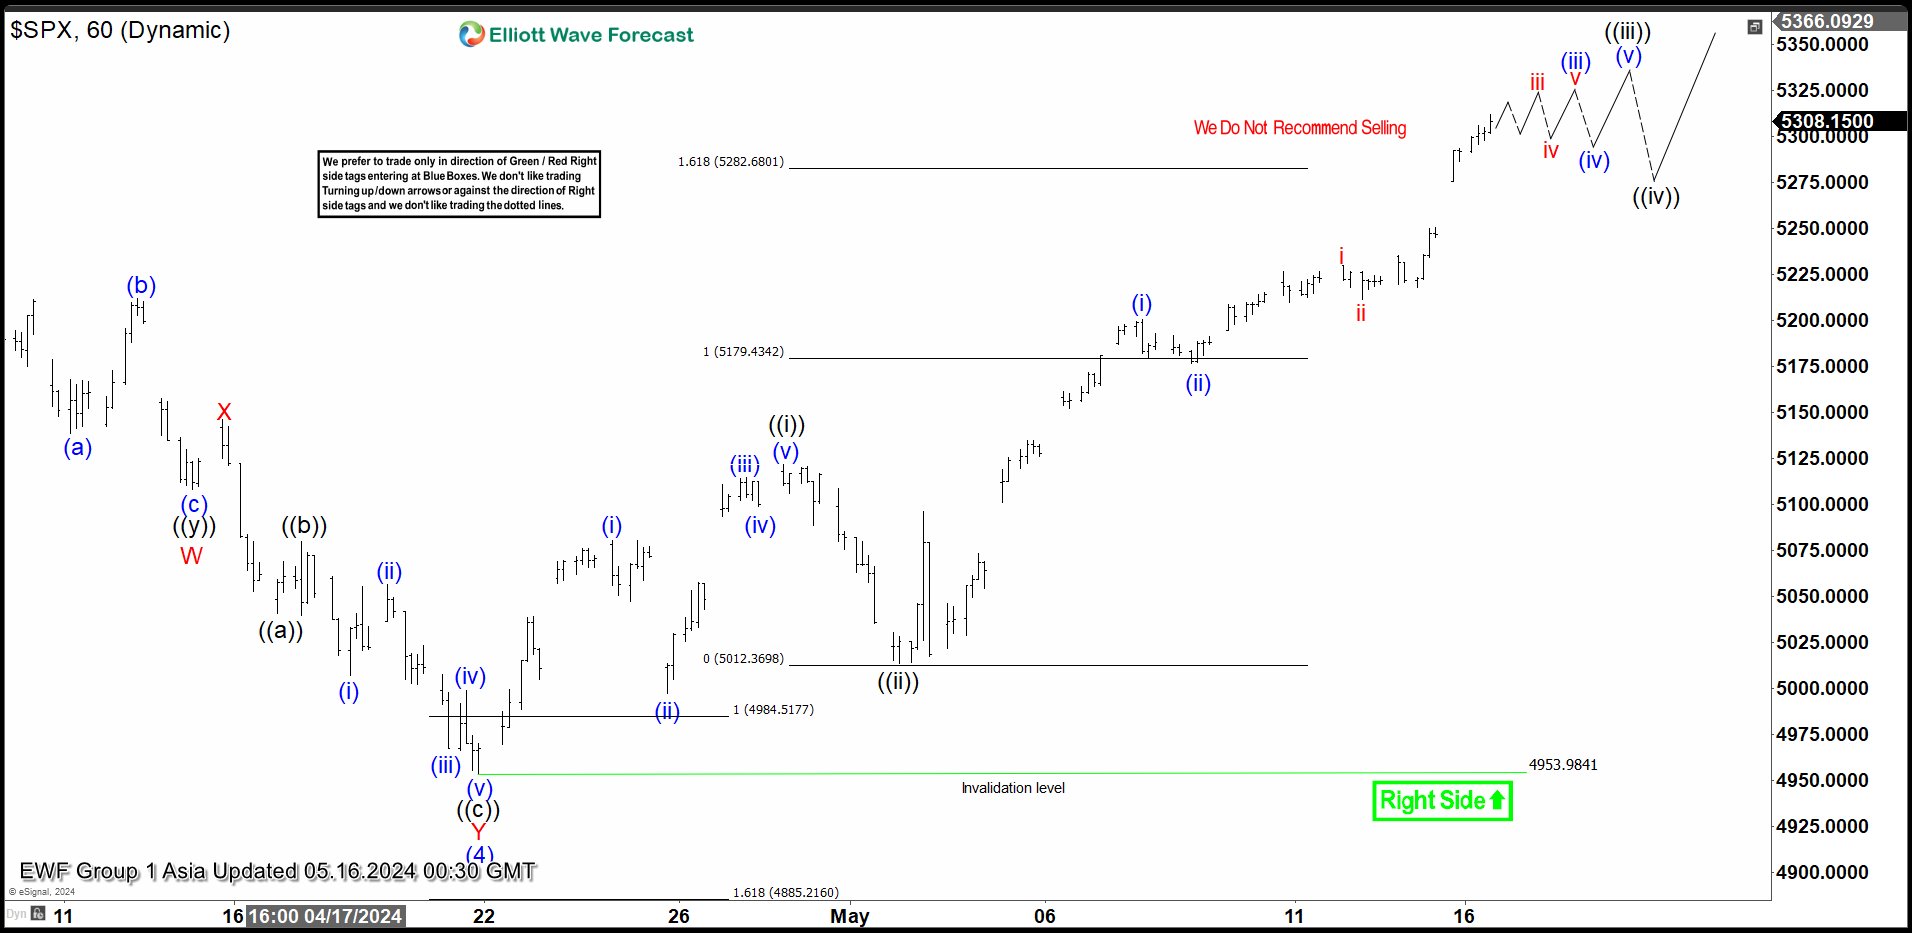 Elliott Wave Analysis on SPX Looking to Extend Higher in Impulsive Structure